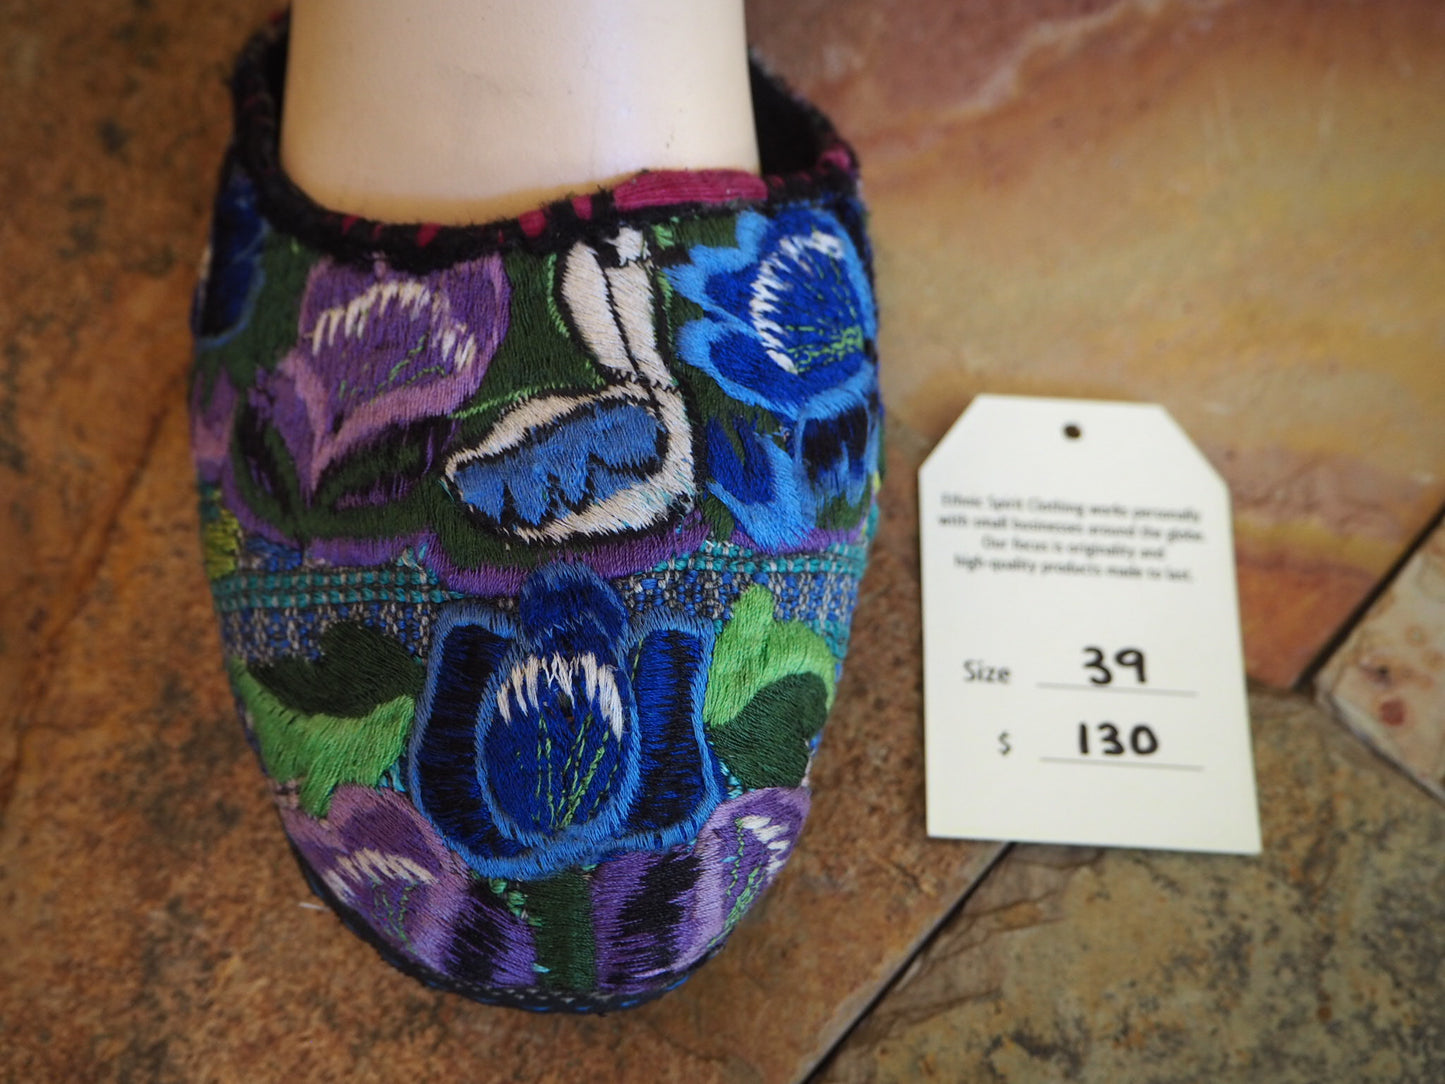 Size 39 Ballerina Sandals - Blue and Purple Flowers